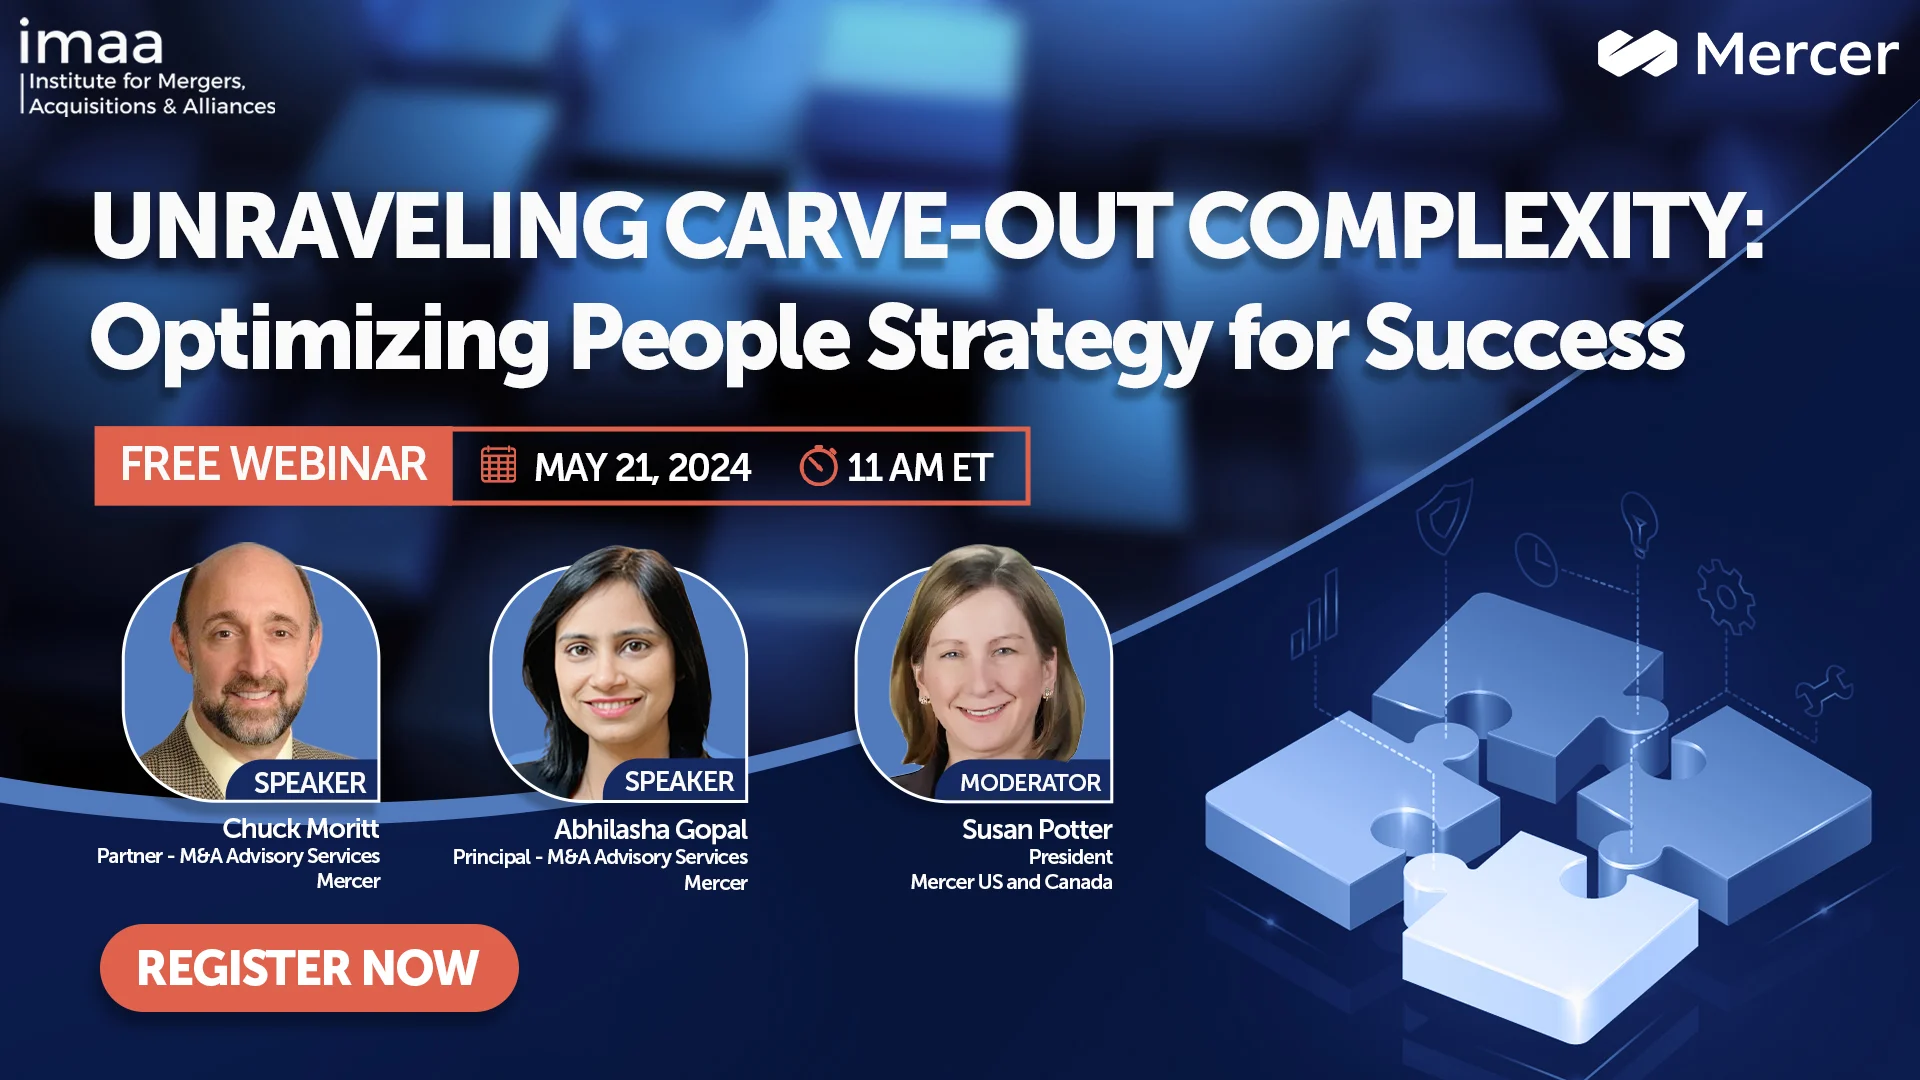 Free Webinar: Unraveling Carve-Out Complexity: Optimizing People Strategy for Success